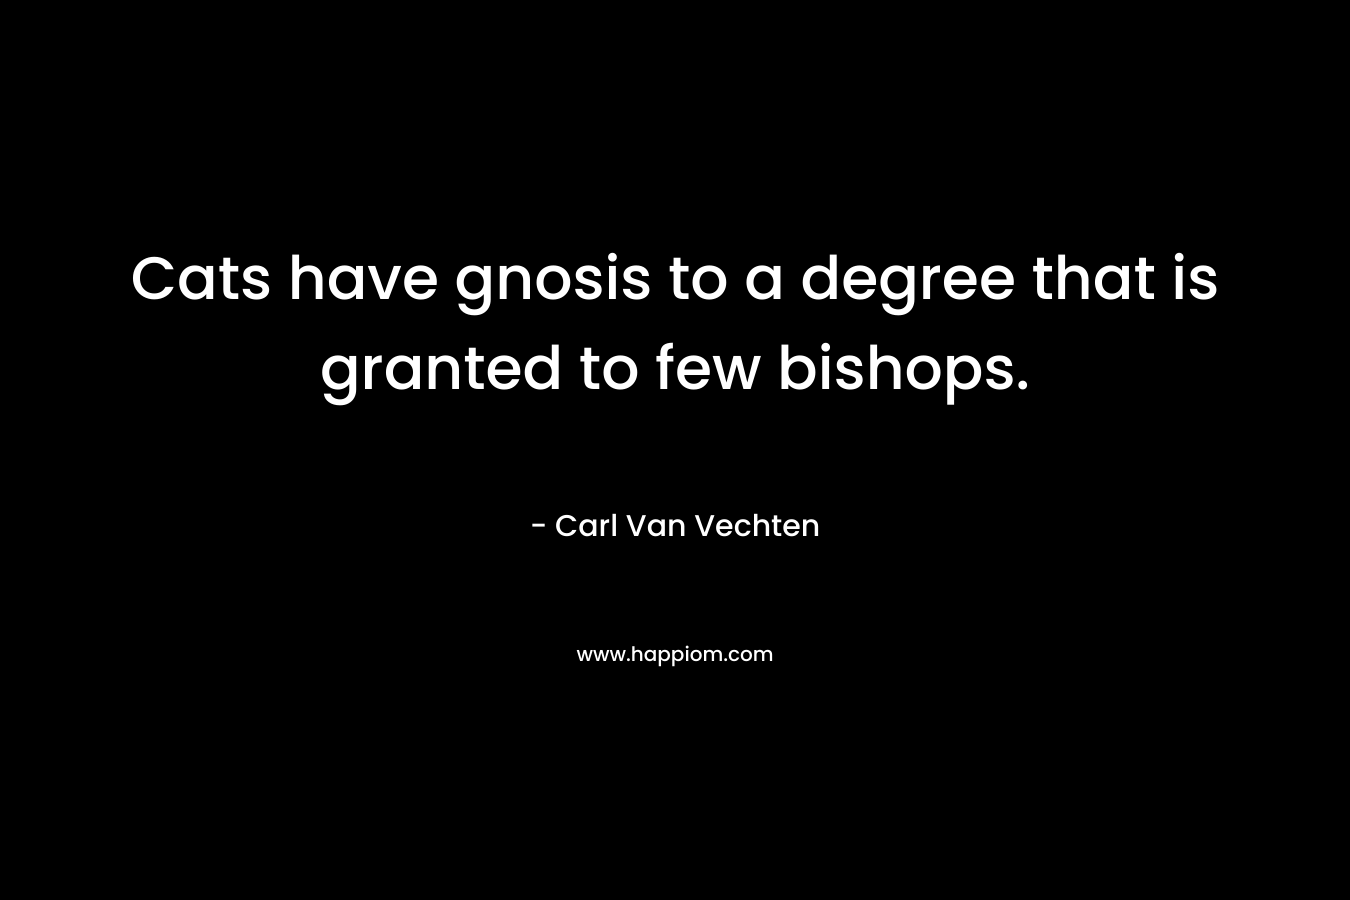 Cats have gnosis to a degree that is granted to few bishops.